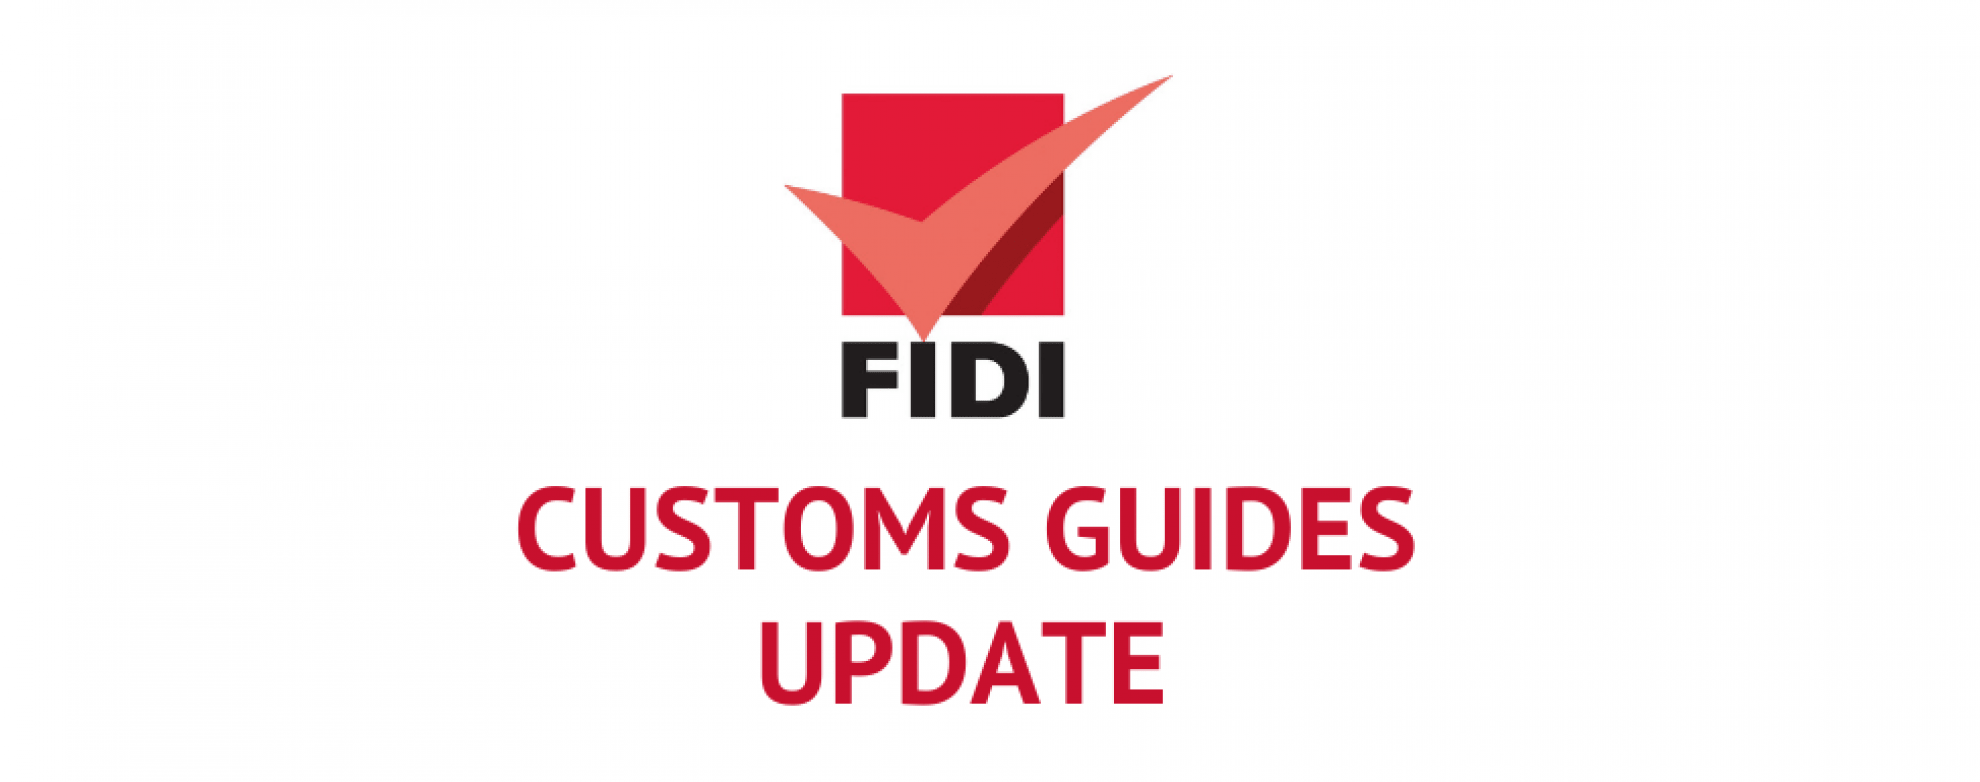 China, Norway, Panama and South Africa's customs guides have been updated